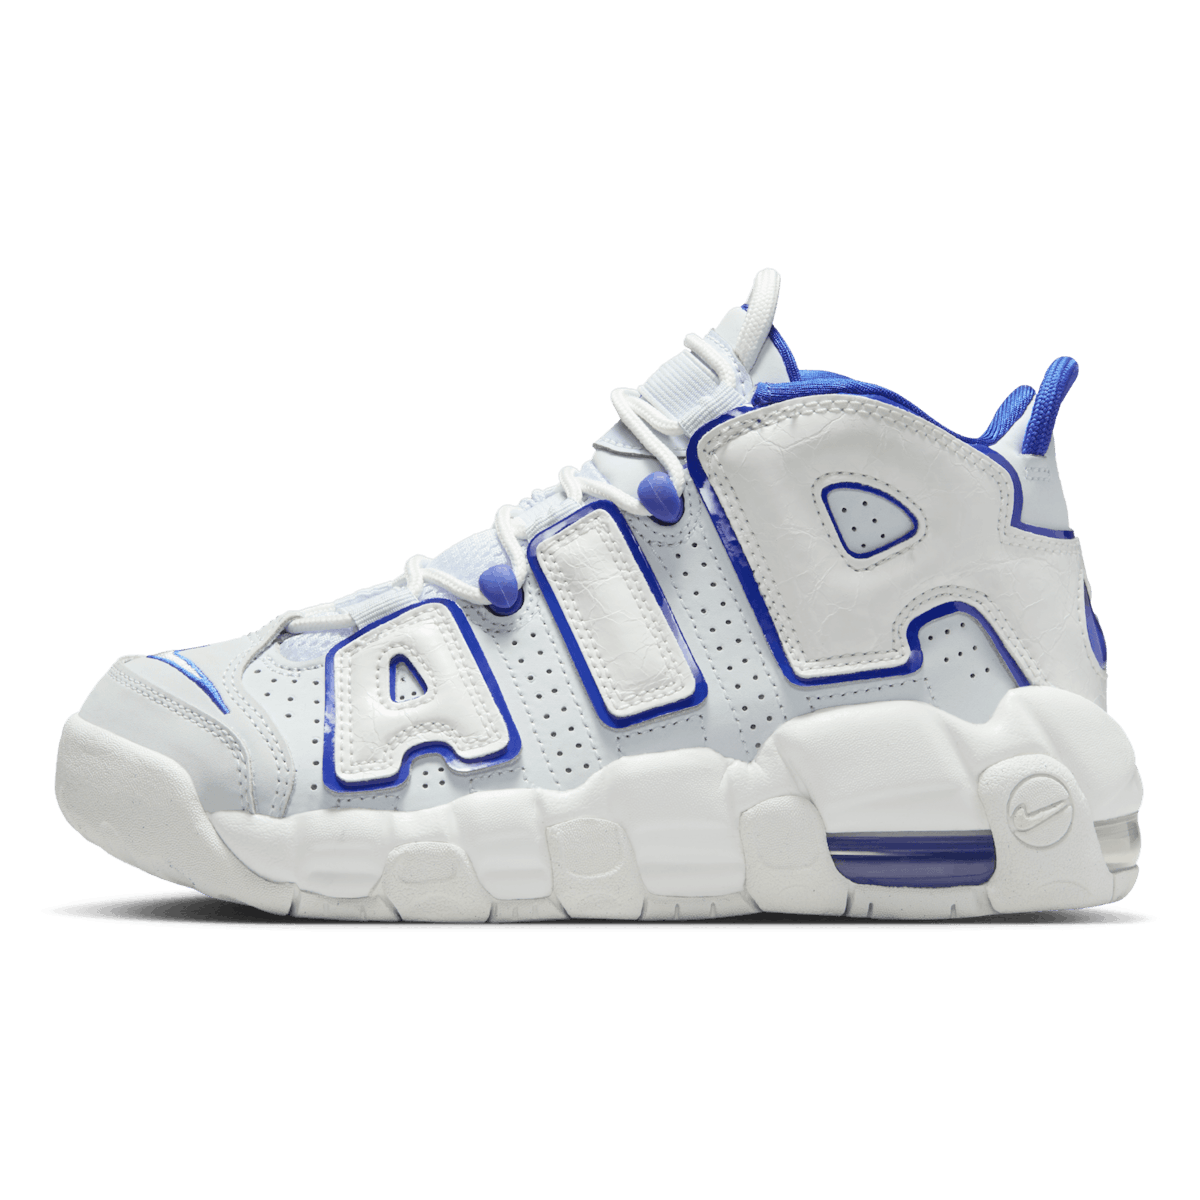 Nike Air More Uptempo kinder